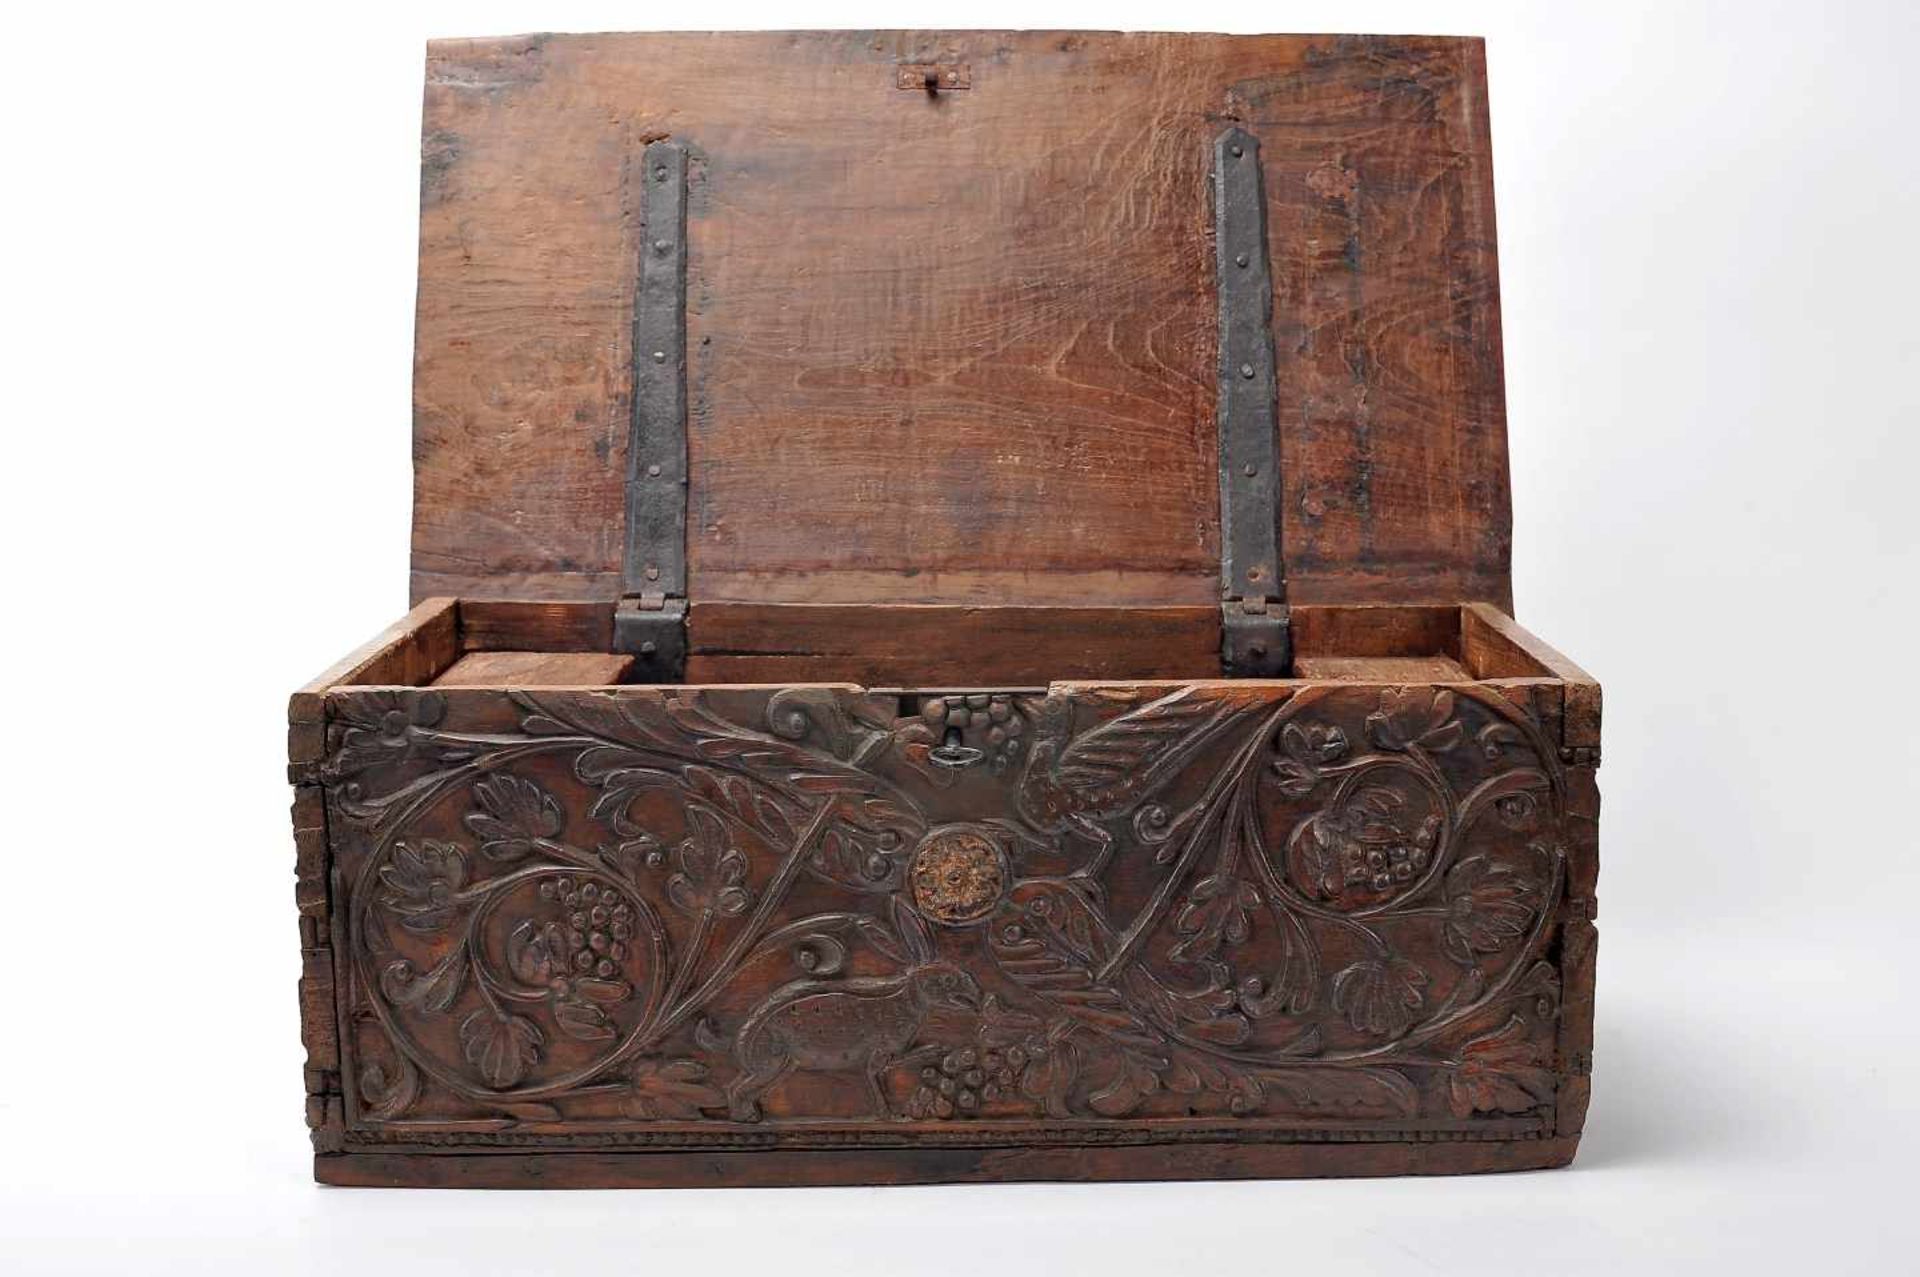 A Small ChestA Small Chest, red anjili wood with traces of polychromy, low-relief decoration " - Image 2 of 4